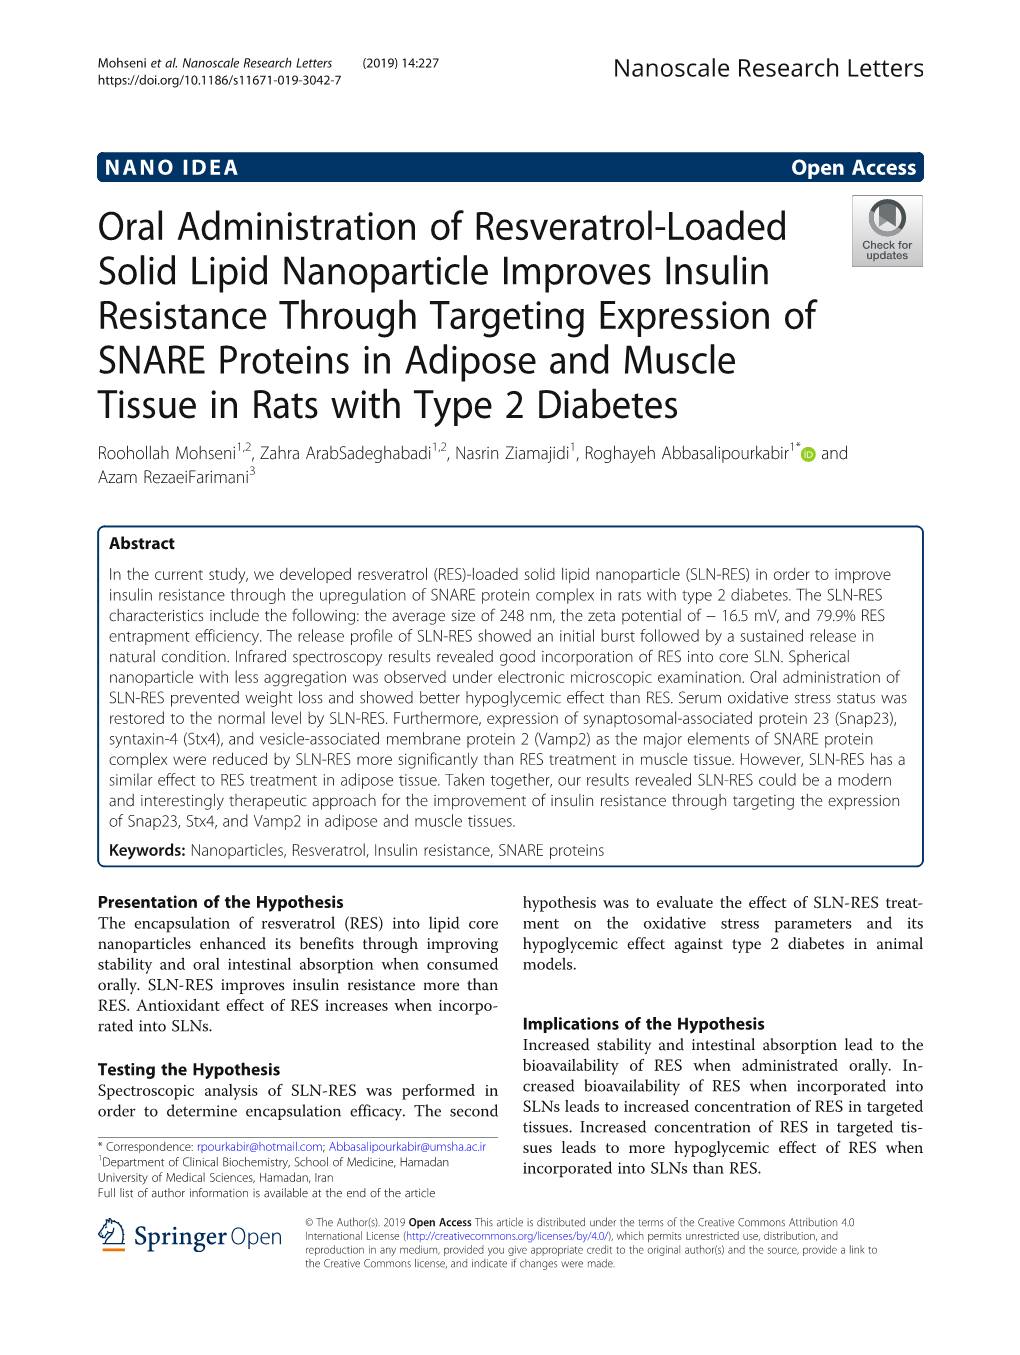 Oral Administration of Resveratrol-Loaded Solid Lipid